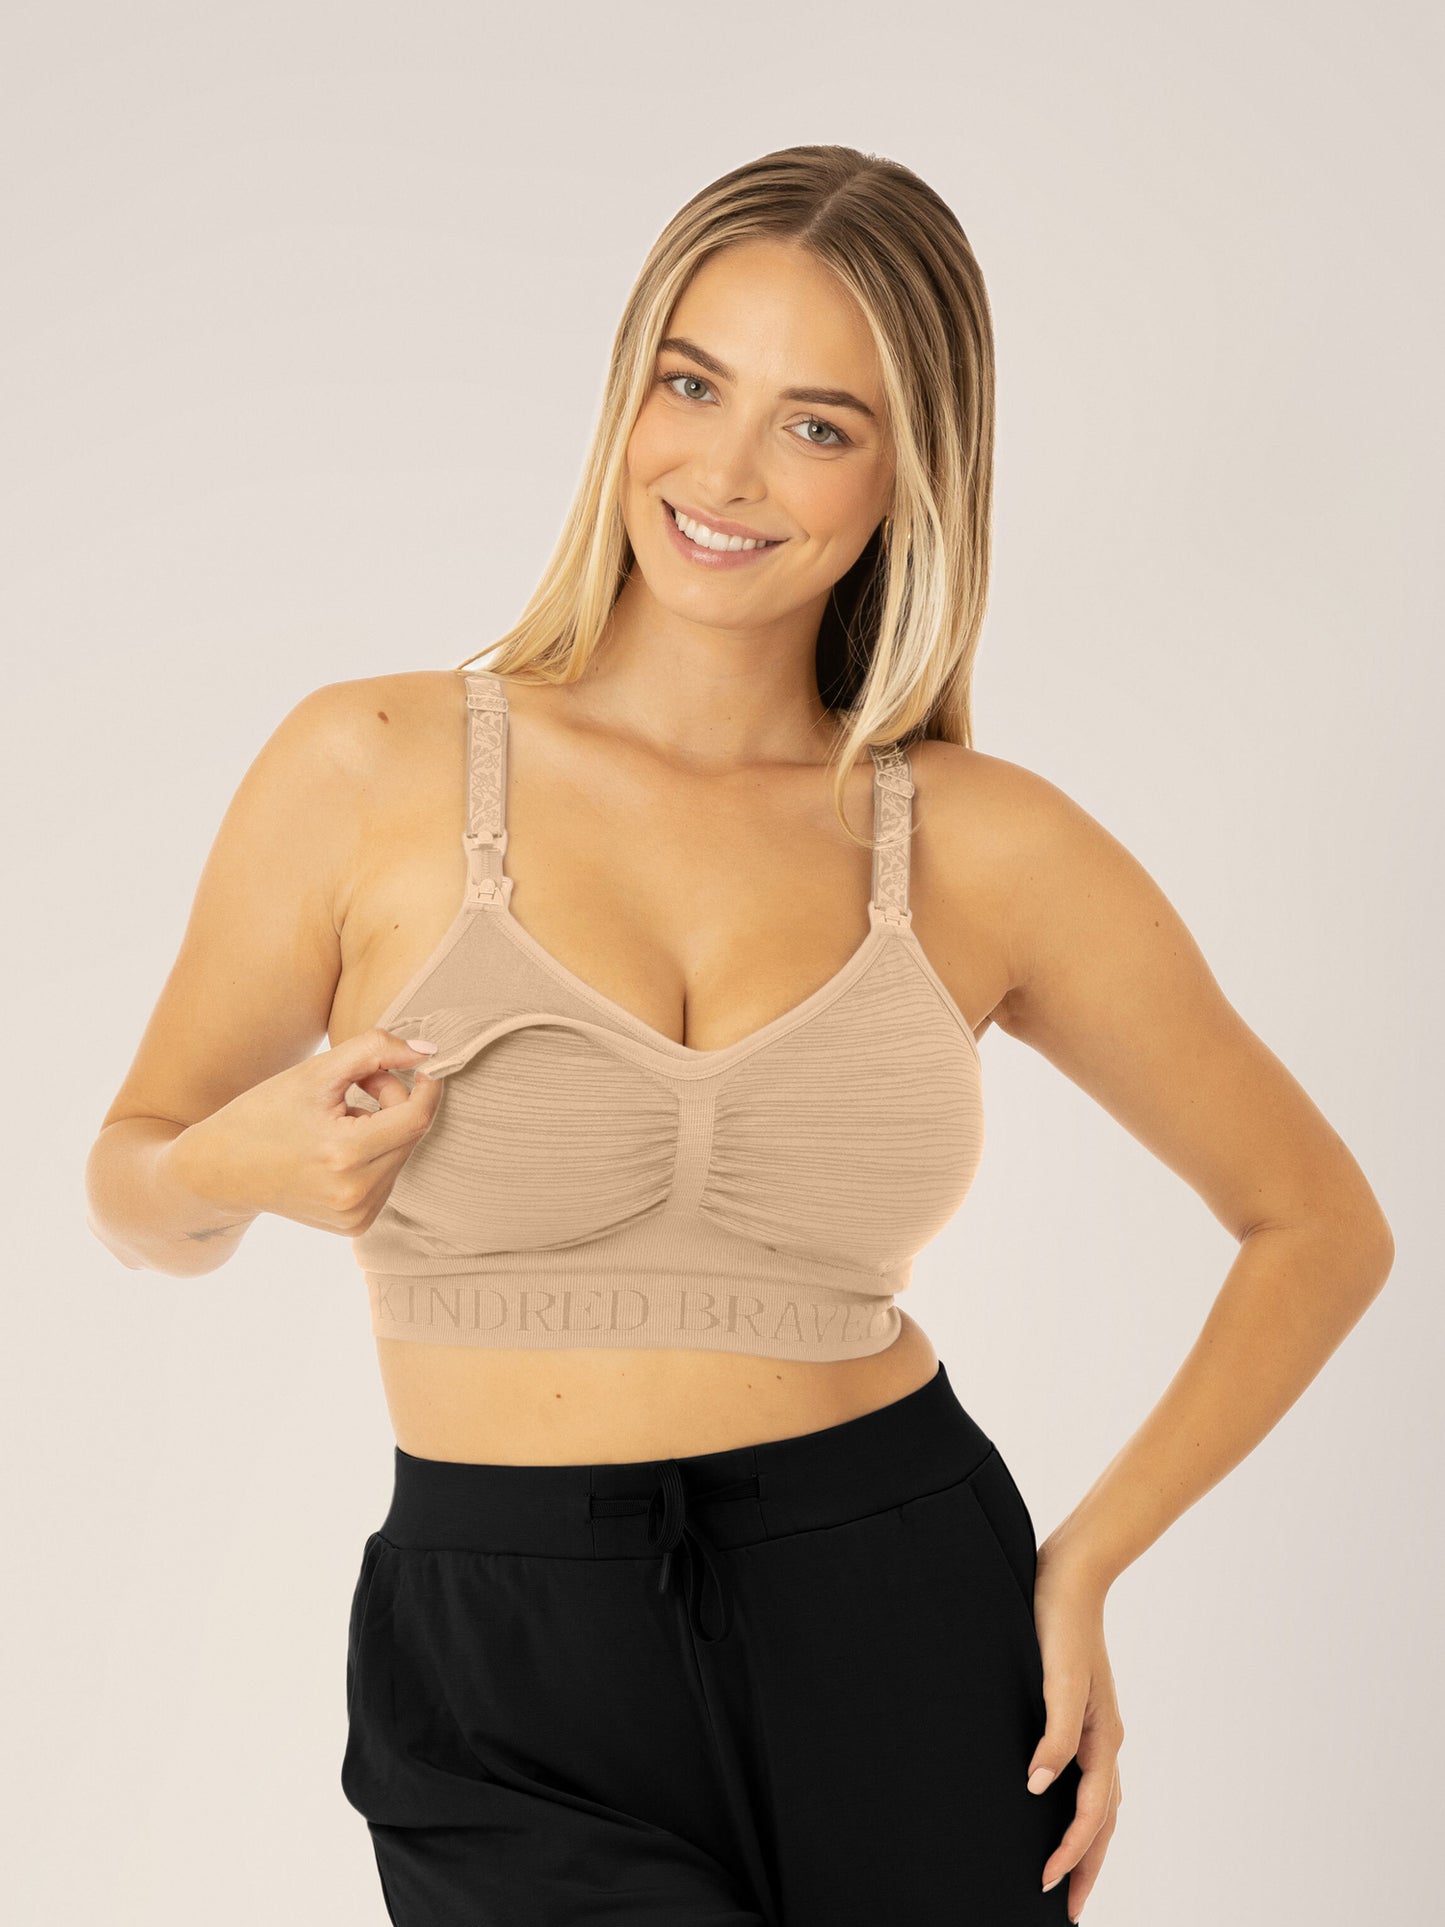 Kindred By Kindred Bravely Women's Sports Pumping & Nursing Bra - Twilight  Xxl-busty : Target